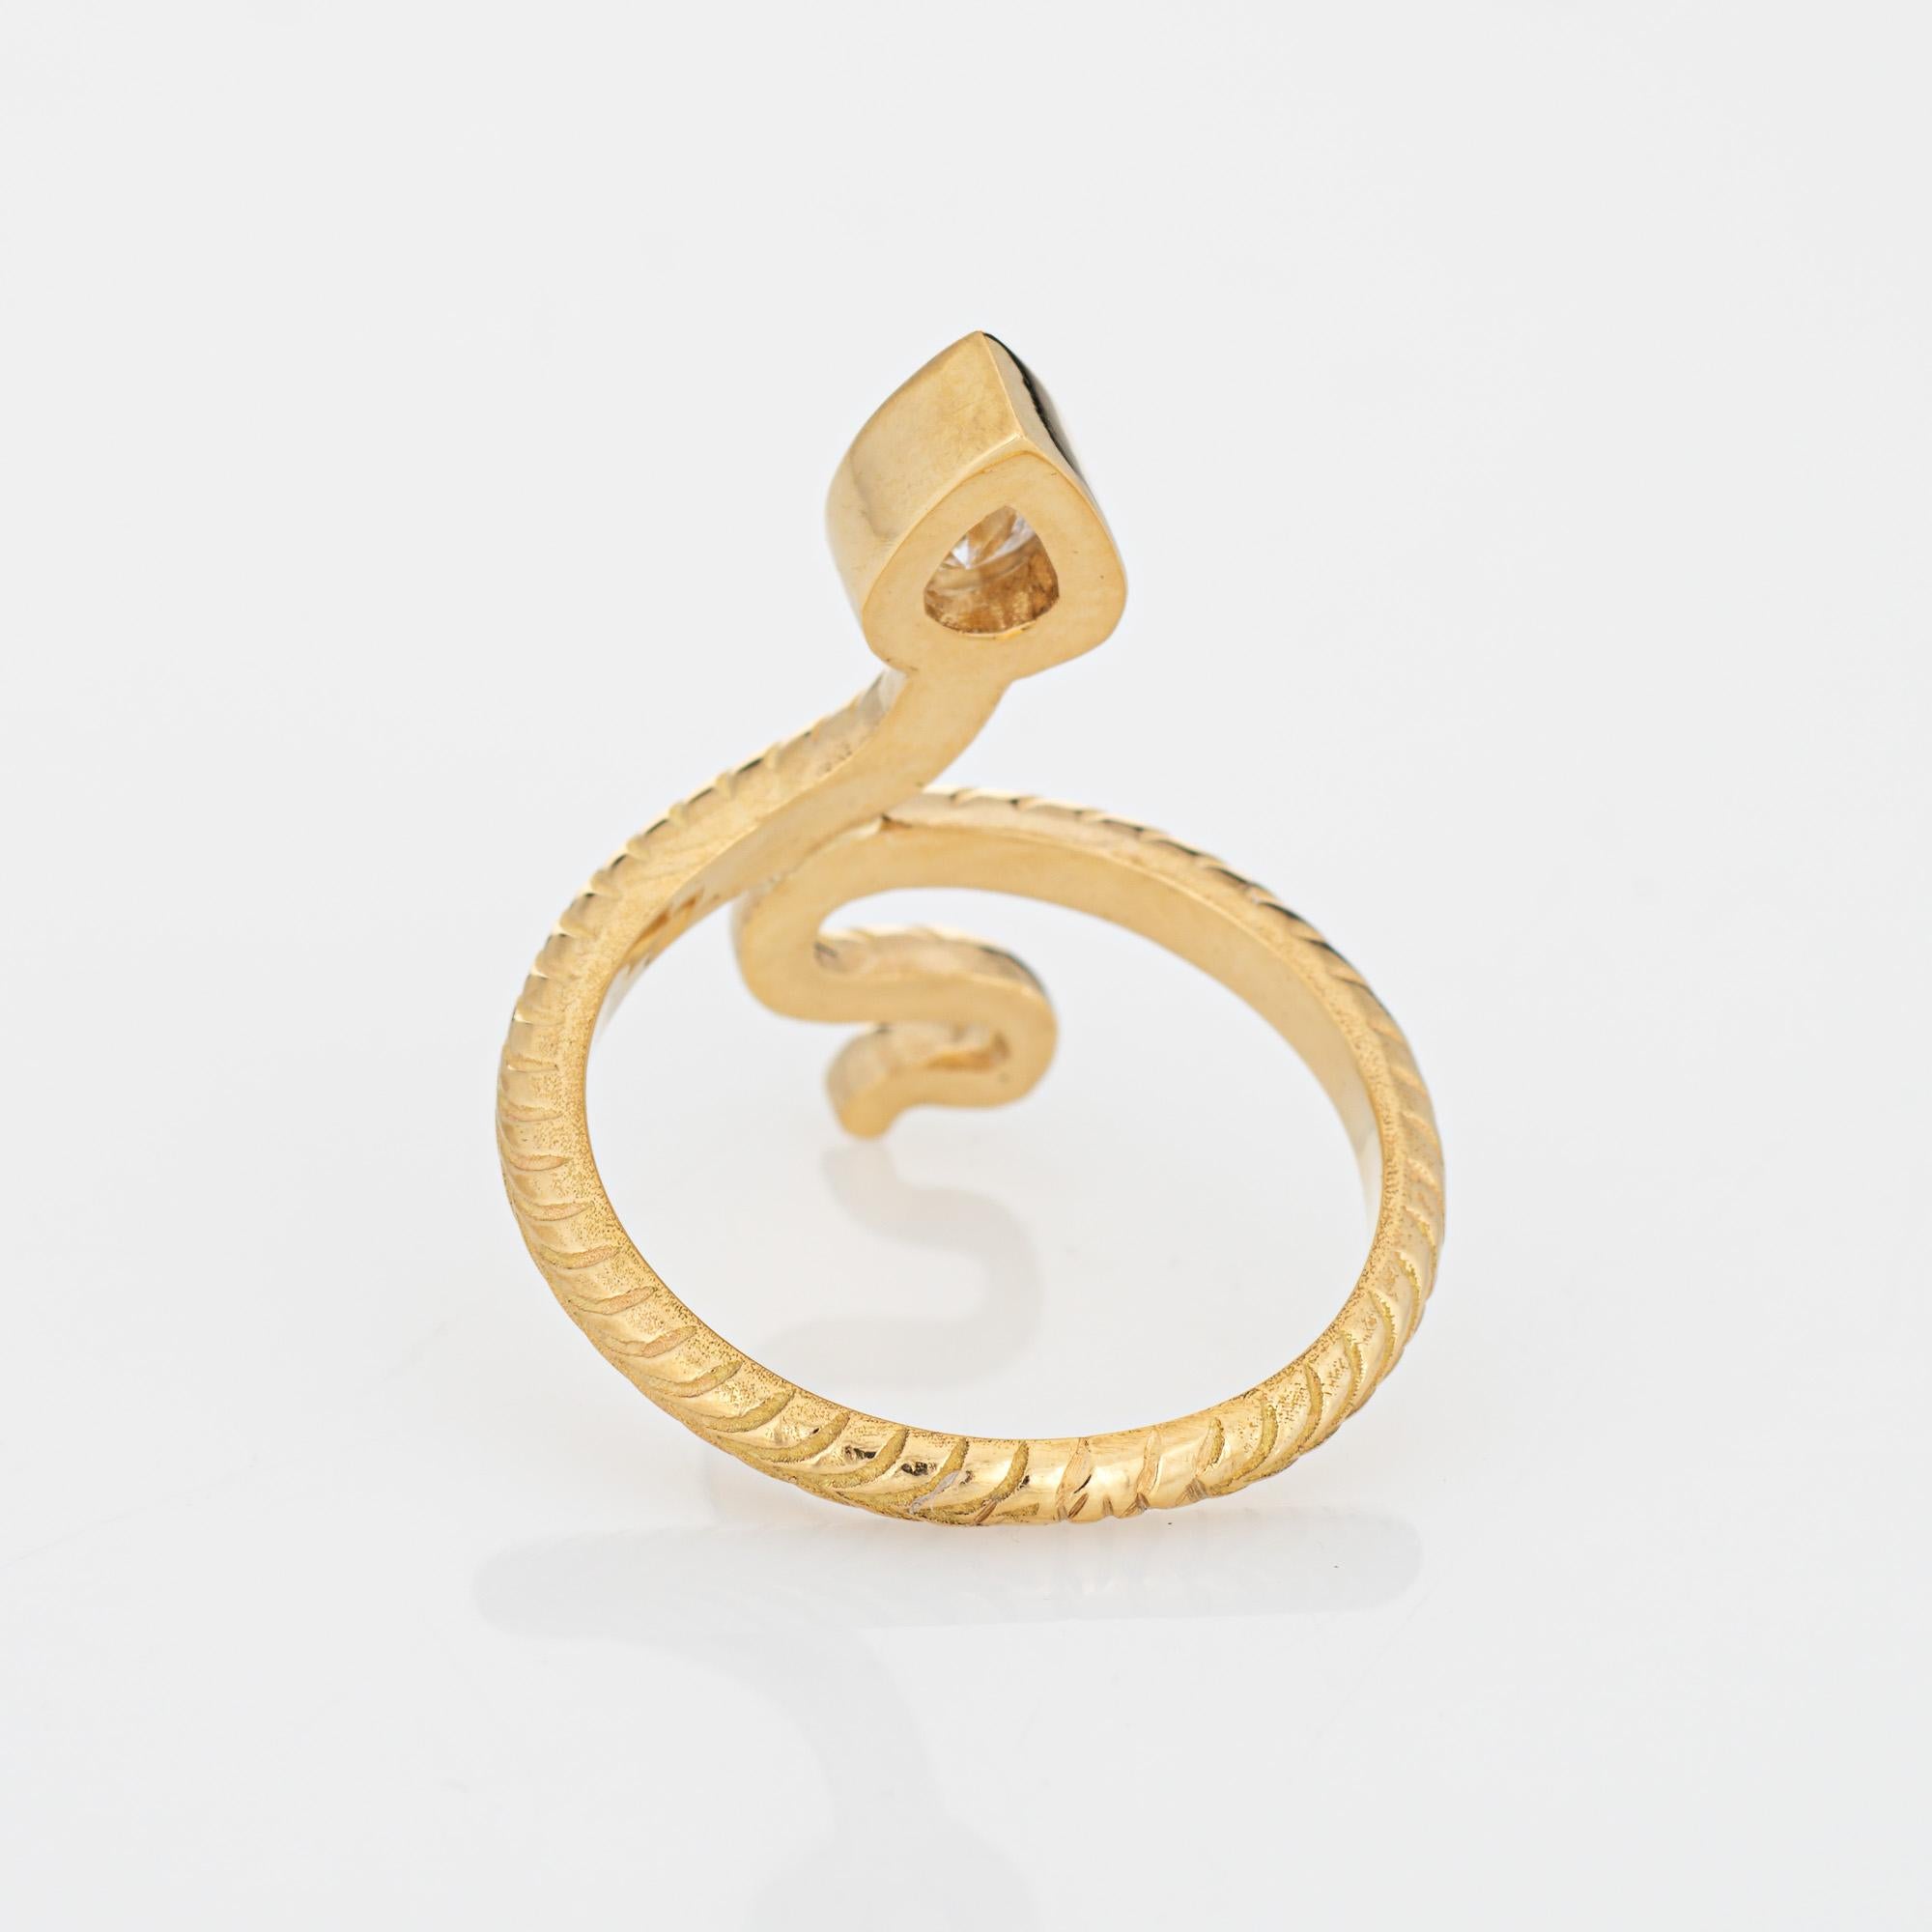 GIA 0.58ct Diamond Snake Ring Estate 18k Yellow Gold Sz 6 Serpent Jewelry In Good Condition For Sale In Torrance, CA